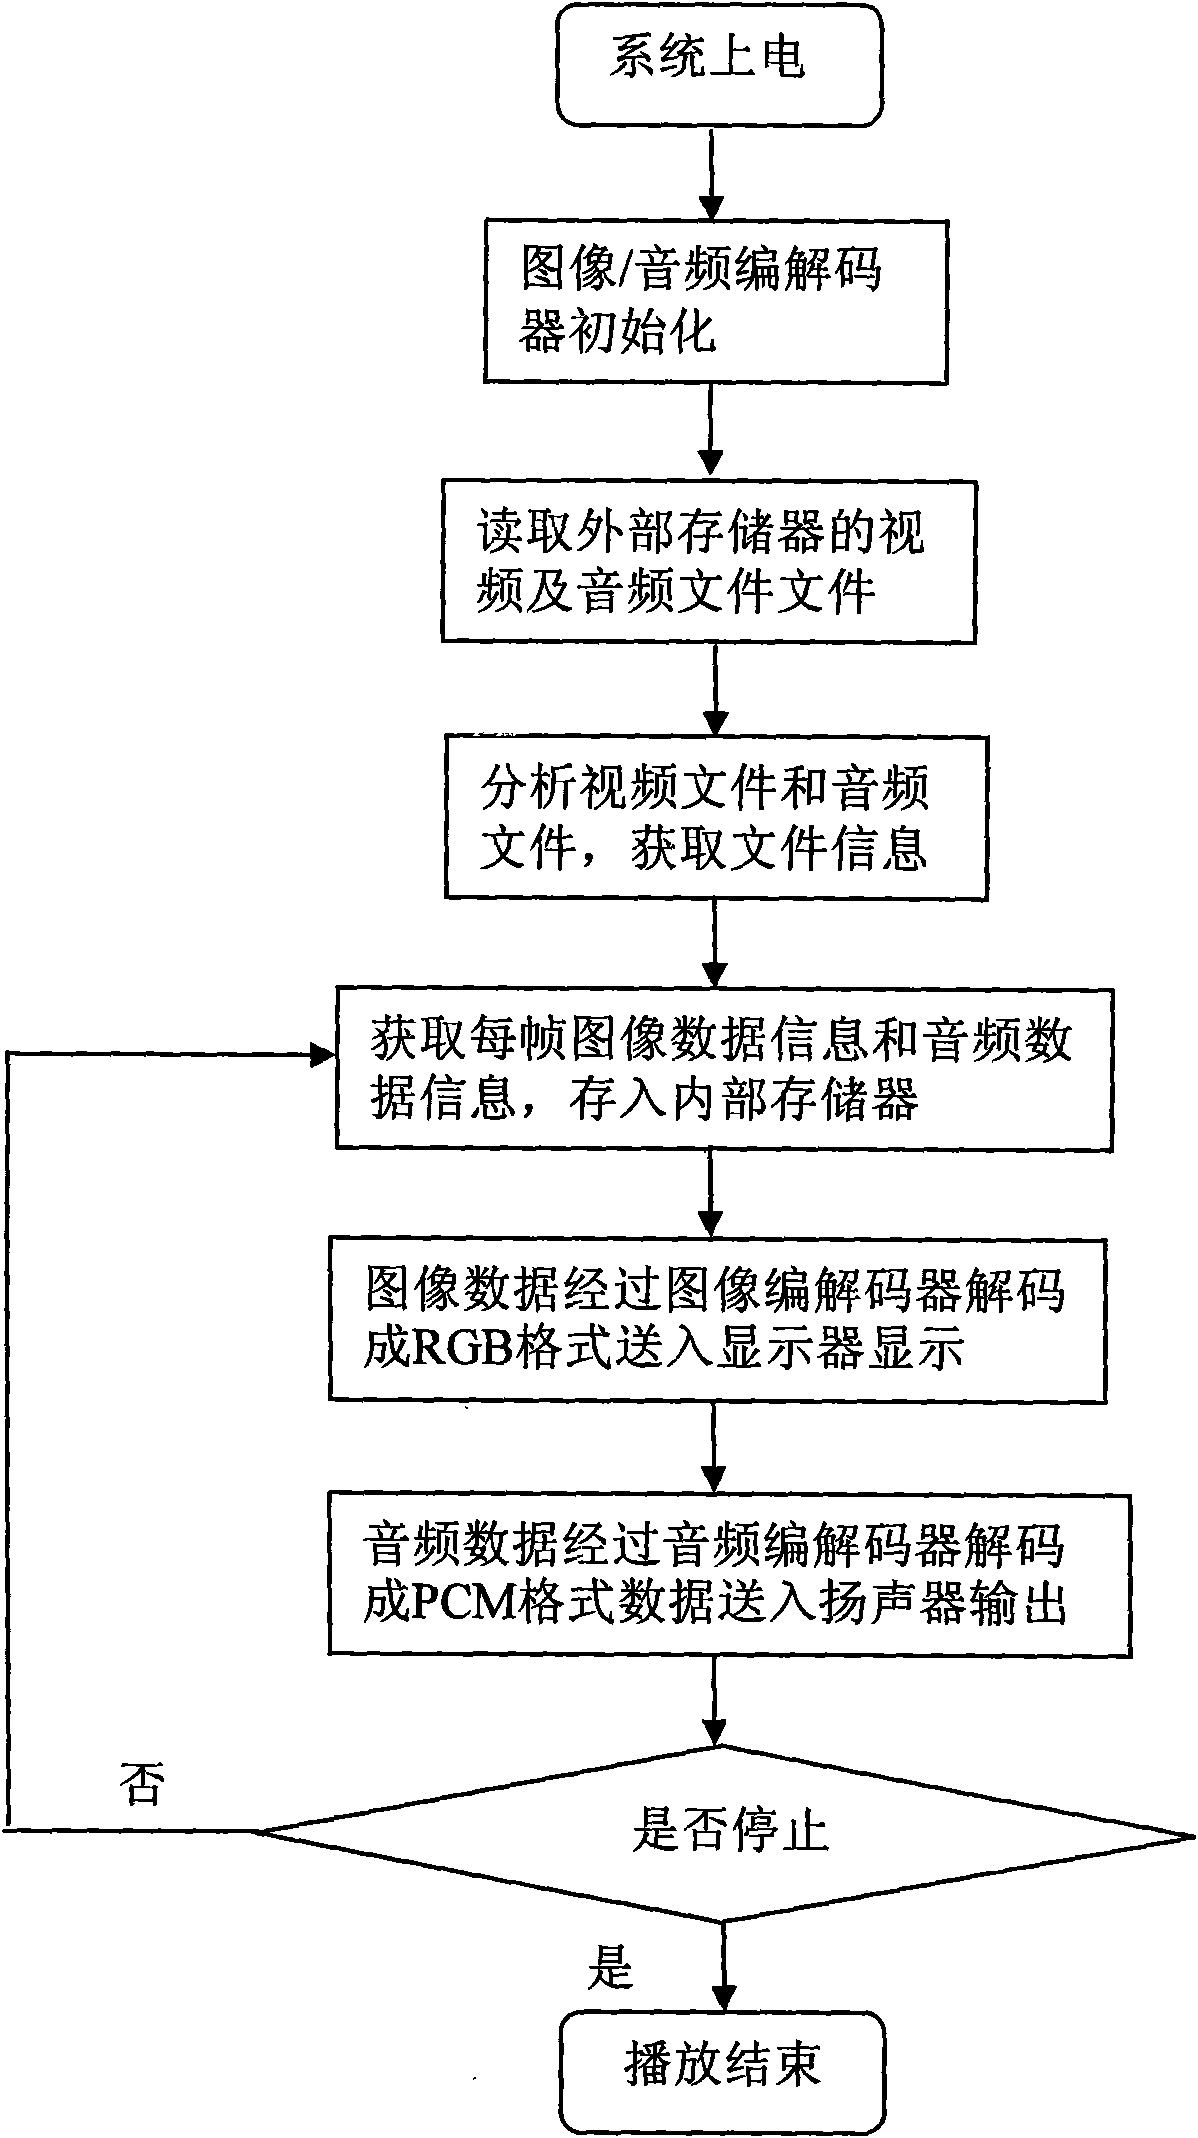 Mobile terminal for processing multimedia data in user-defined format and realization method thereof